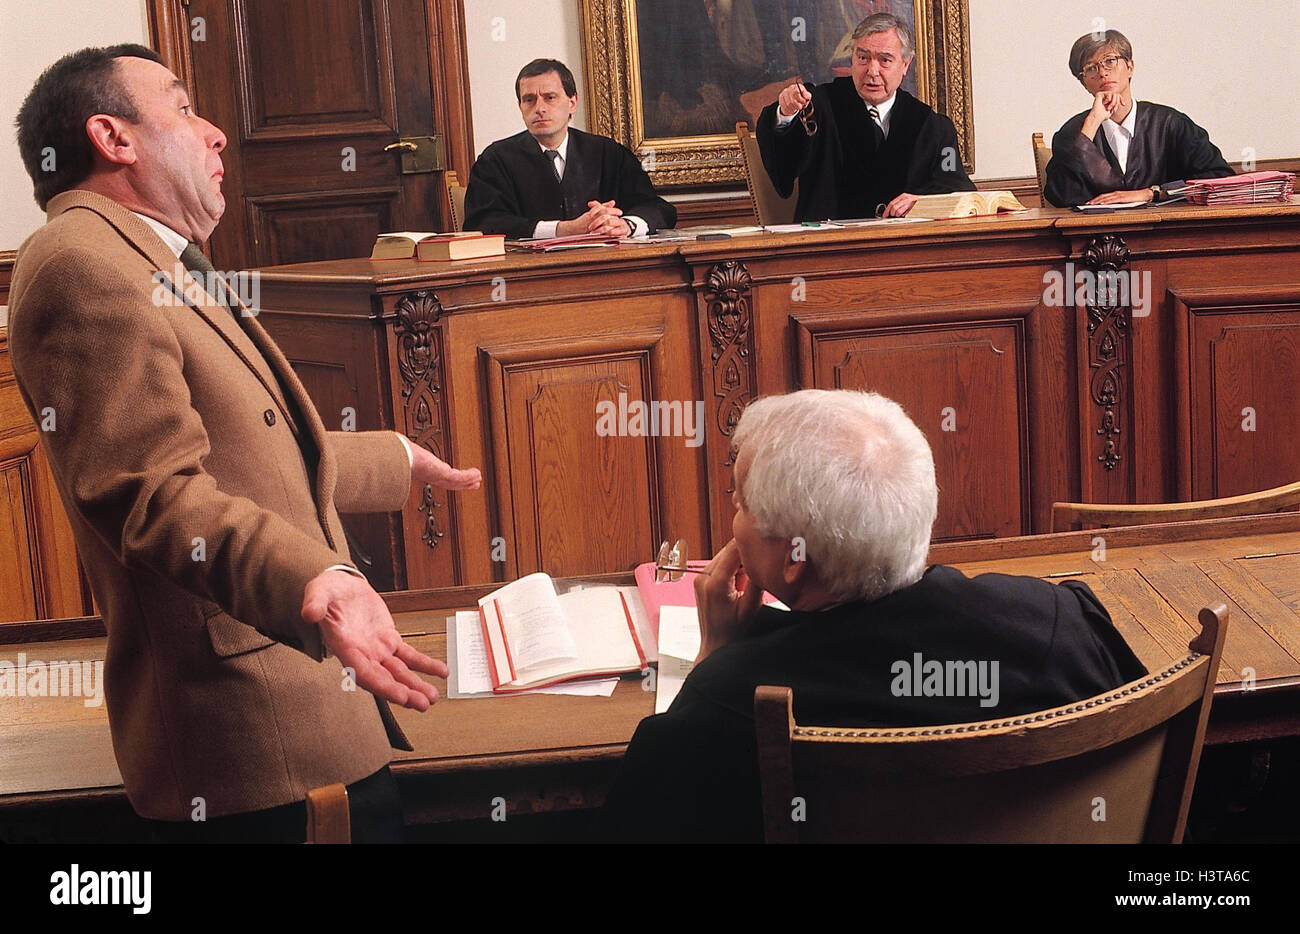 Dish scene, defendant, gesture, innocence judicature, dish, courtroom, negotiations, charge, hearing, right, justice, judges, assessors, sollicitor, defendant, statement, witness's statement, innocence, innocent, innocently, ignorantly, helplessly, unsusp Stock Photo